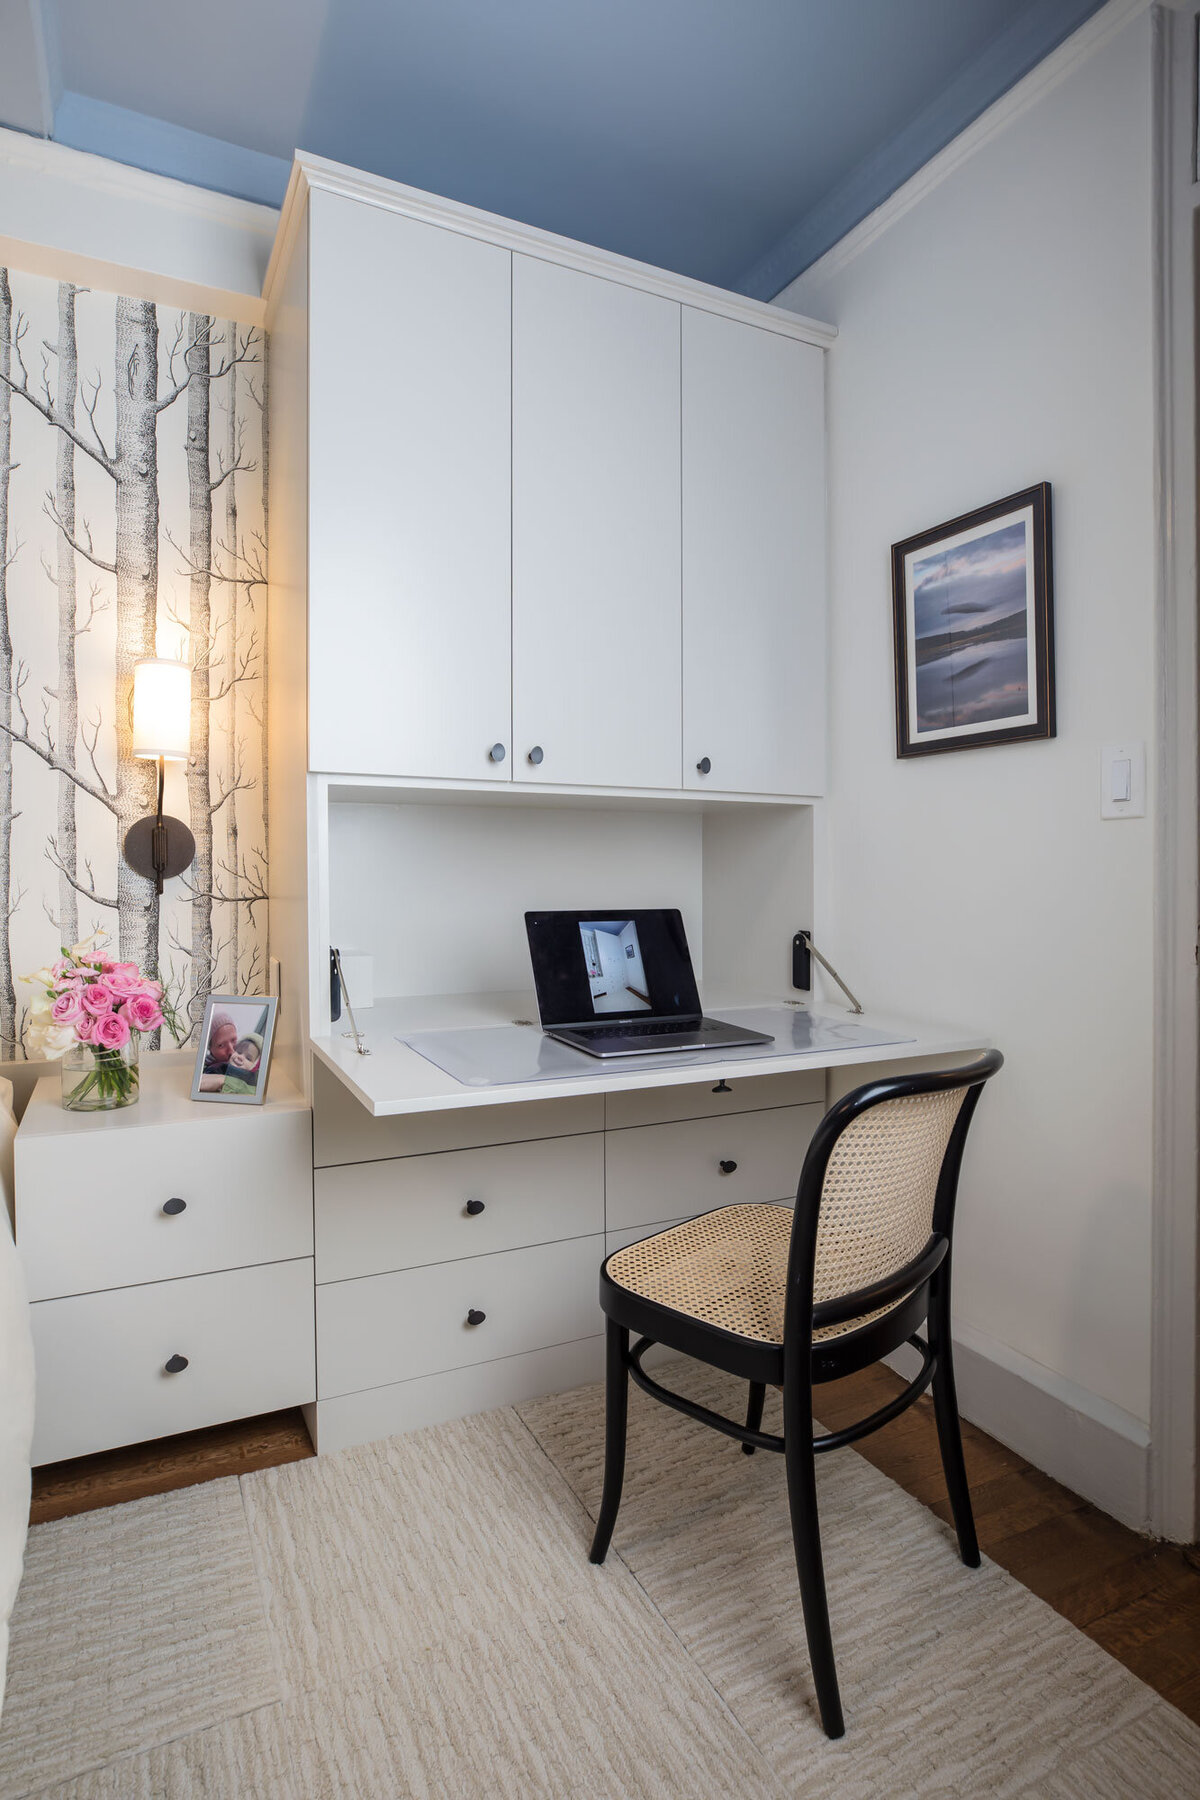 Claudia-Giselle-Interior-Design-NYC-Bedroom-Office-Desk-Open